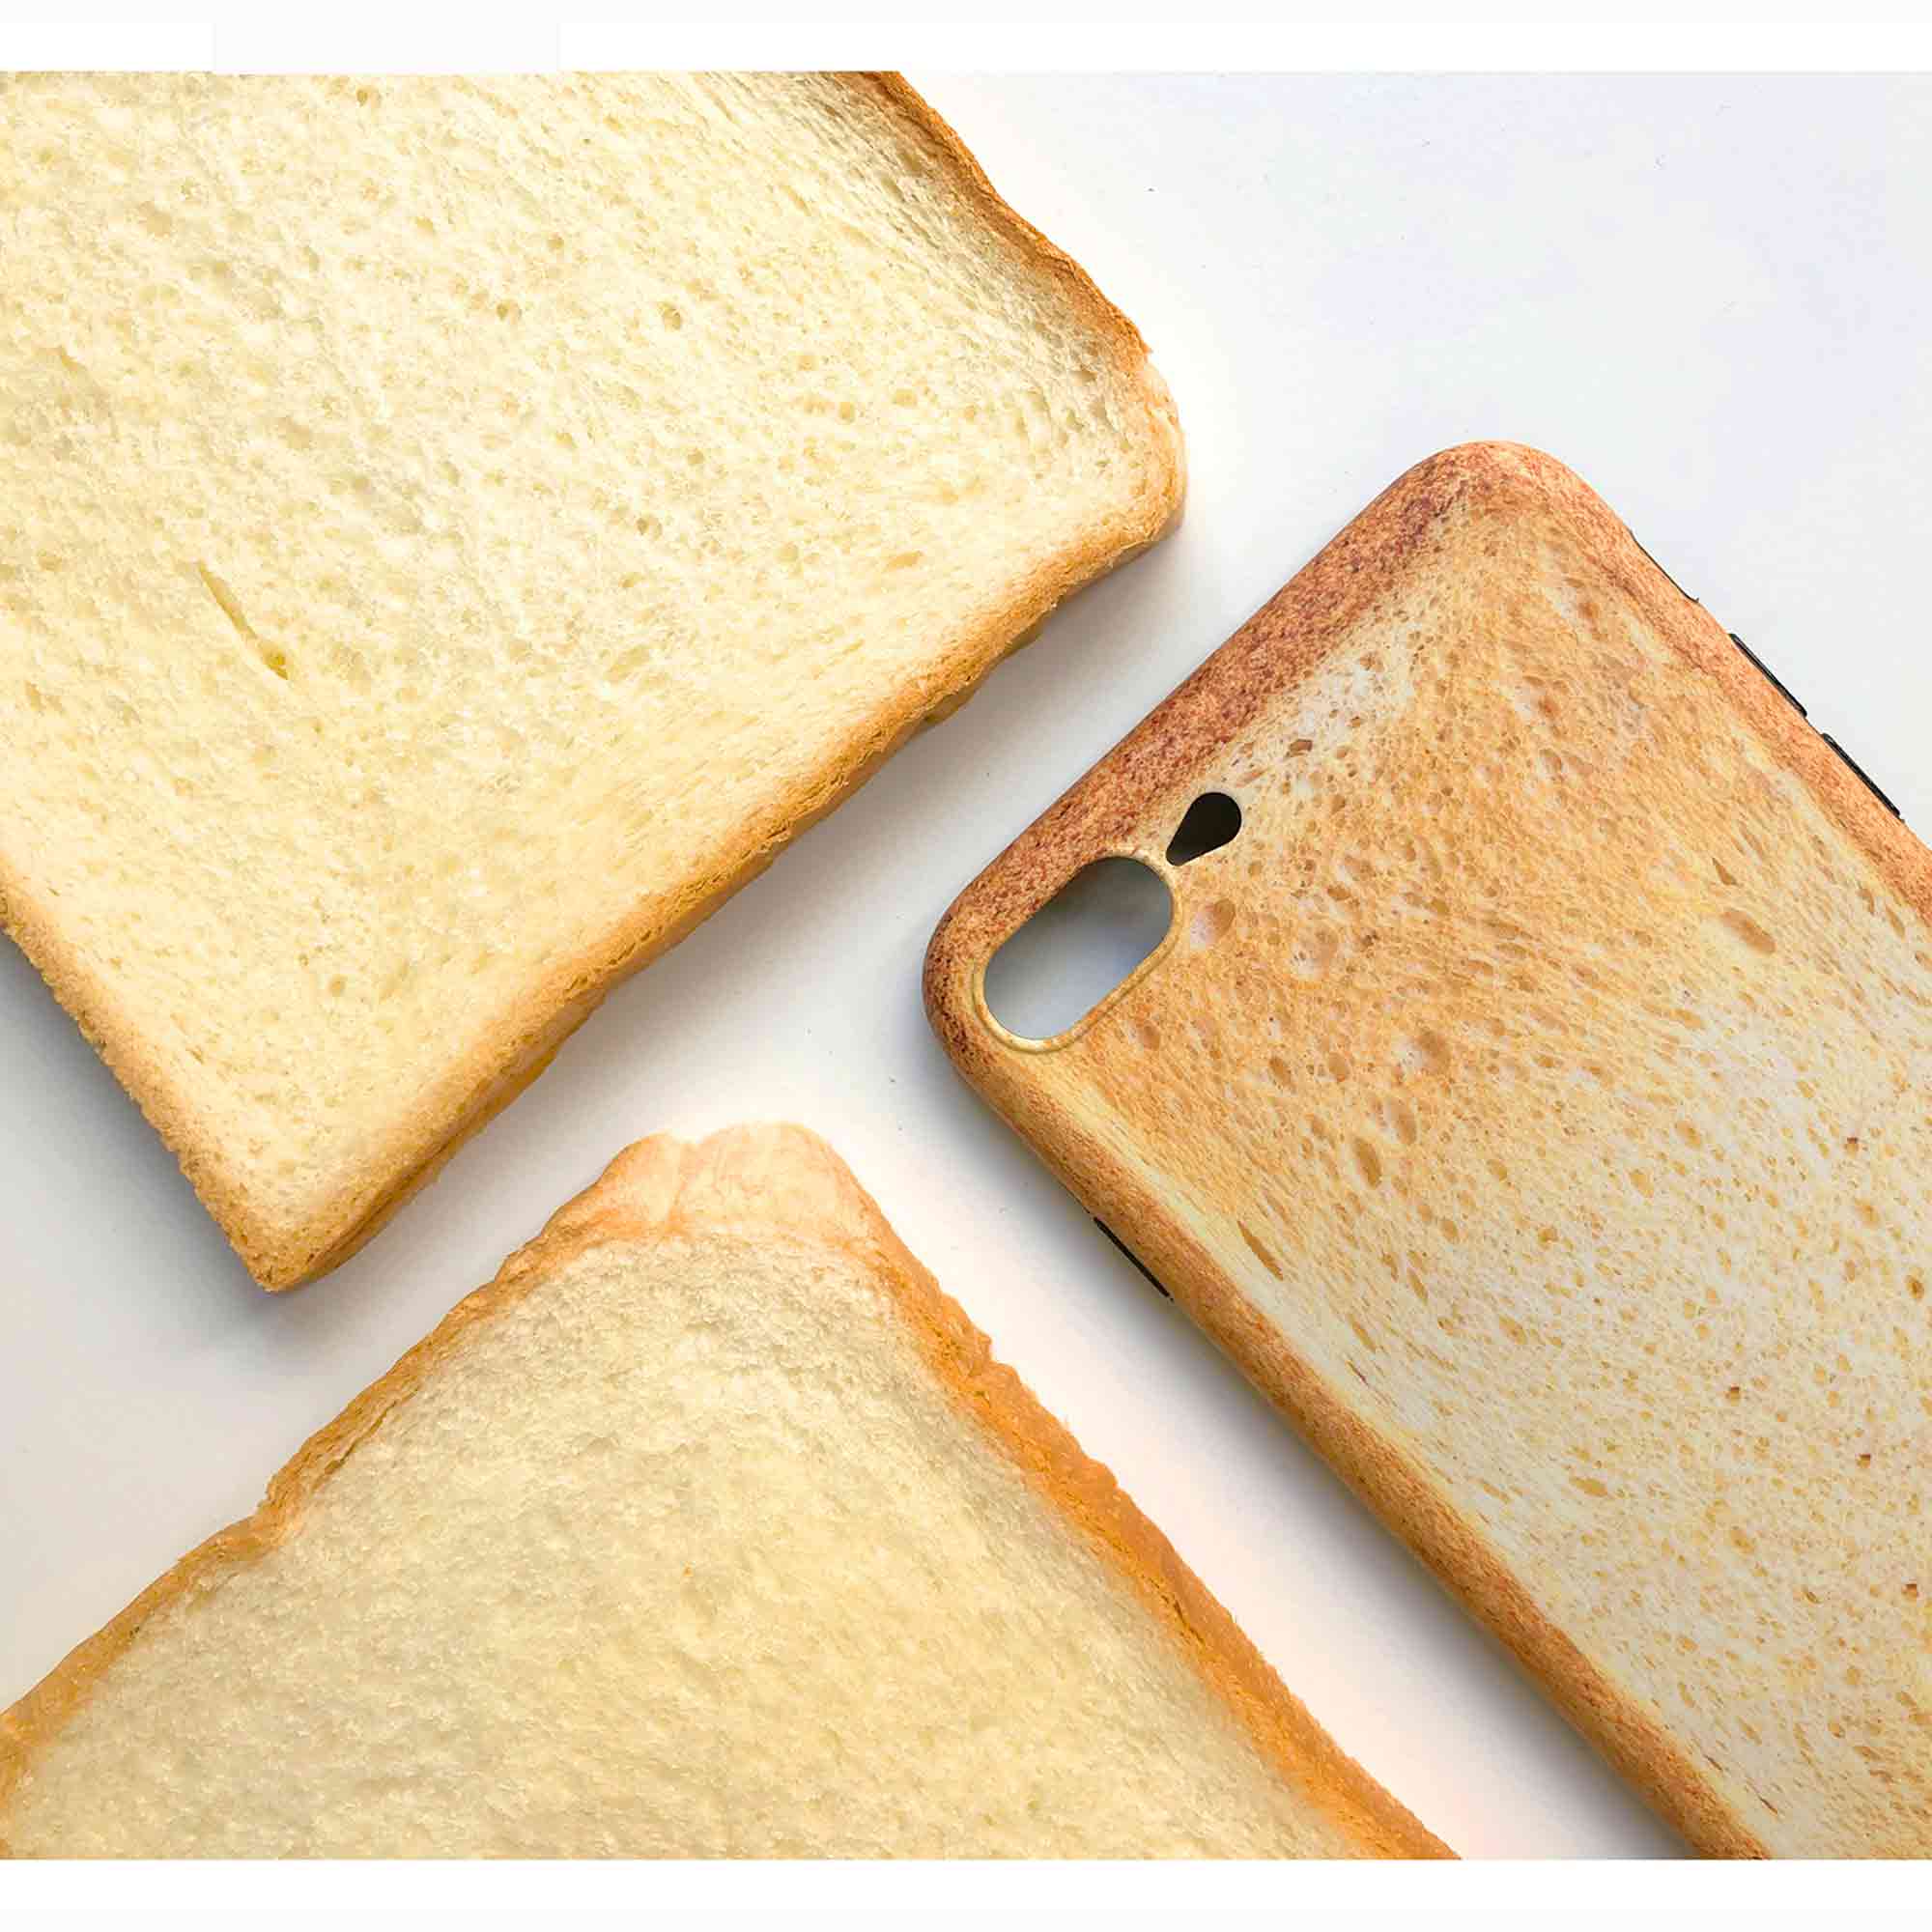 Toast Bread Protective iPhone Case